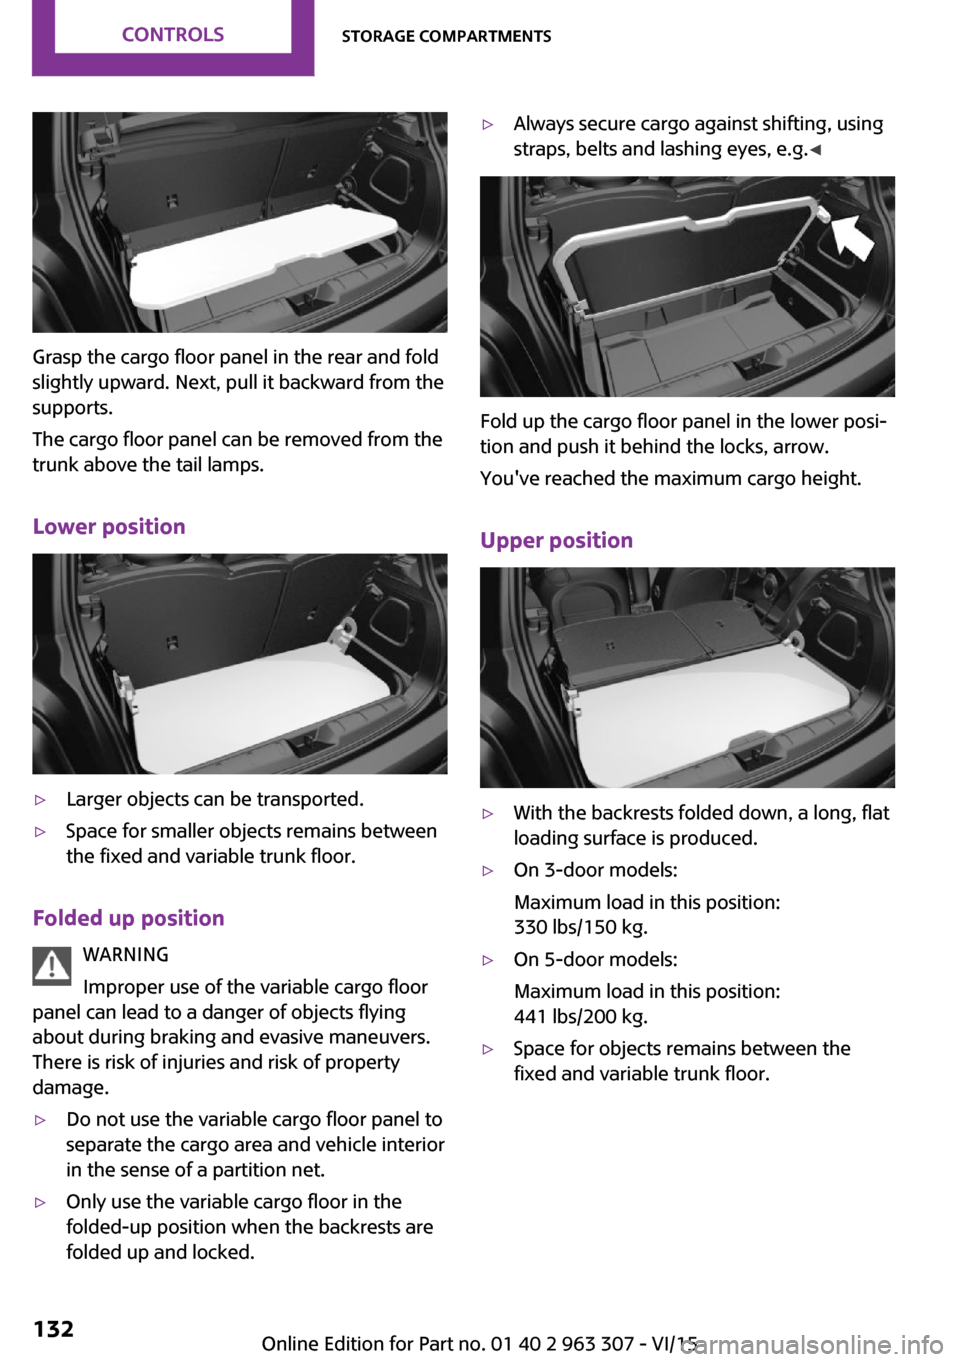 MINI Hardtop 4 Door 2016  Owners Manual Grasp the cargo floor panel in the rear and fold
slightly upward. Next, pull it backward from the
supports.
The cargo floor panel can be removed from the
trunk above the tail lamps.
Lower position
▷